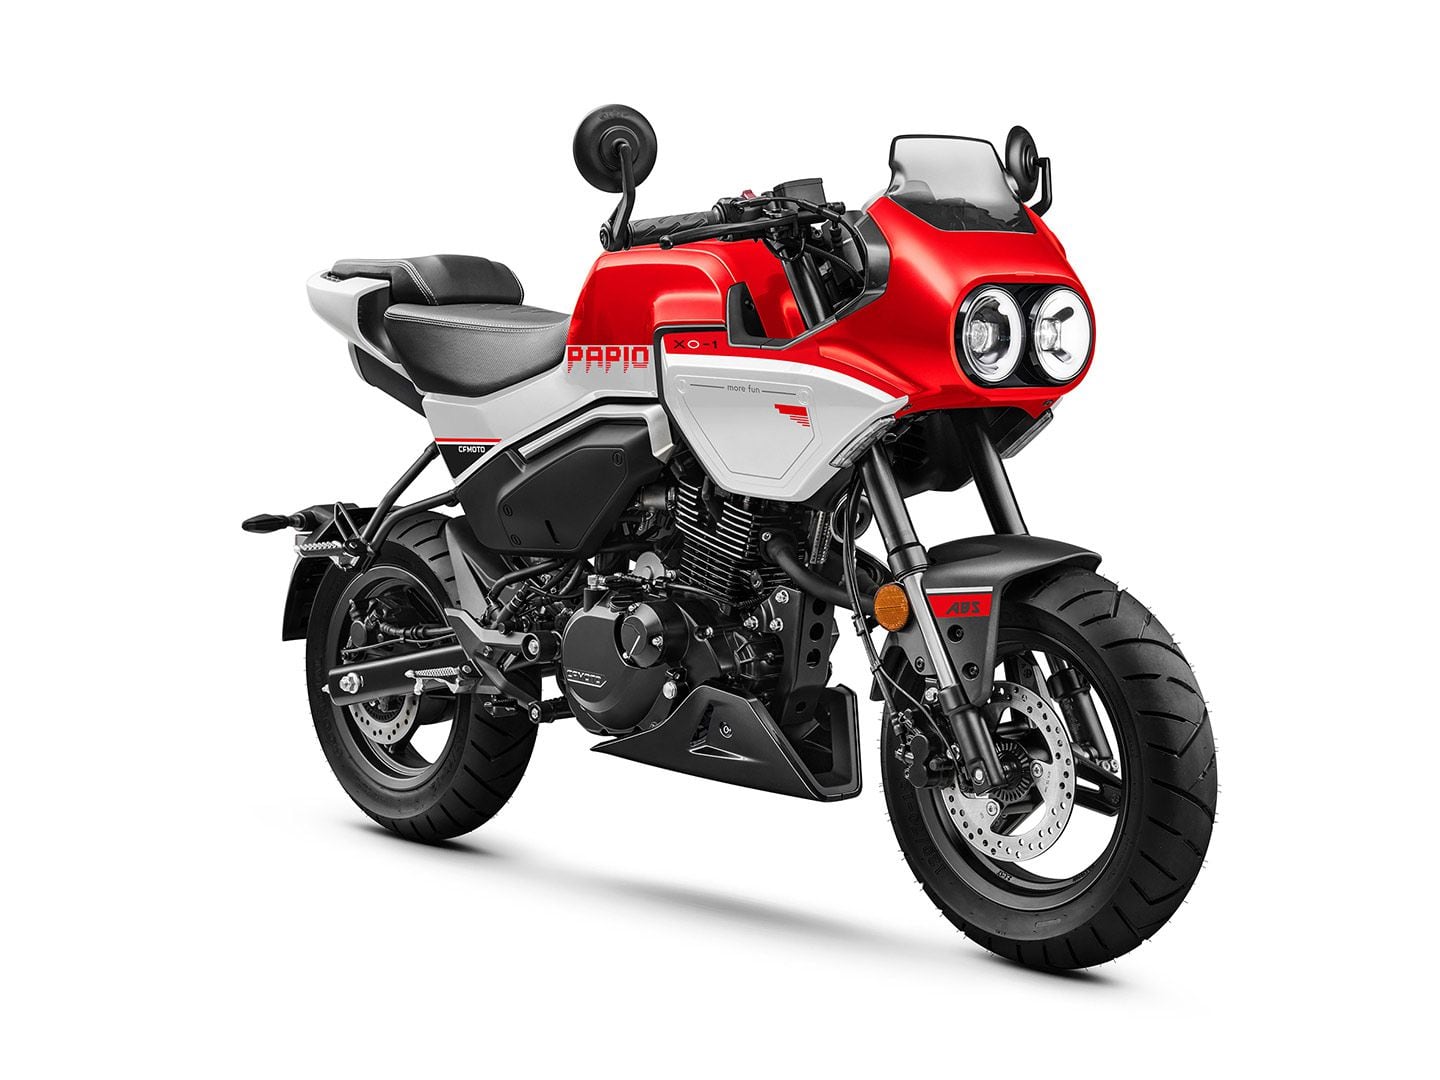 The CFMoto Pappio SS is already for sale in the US.